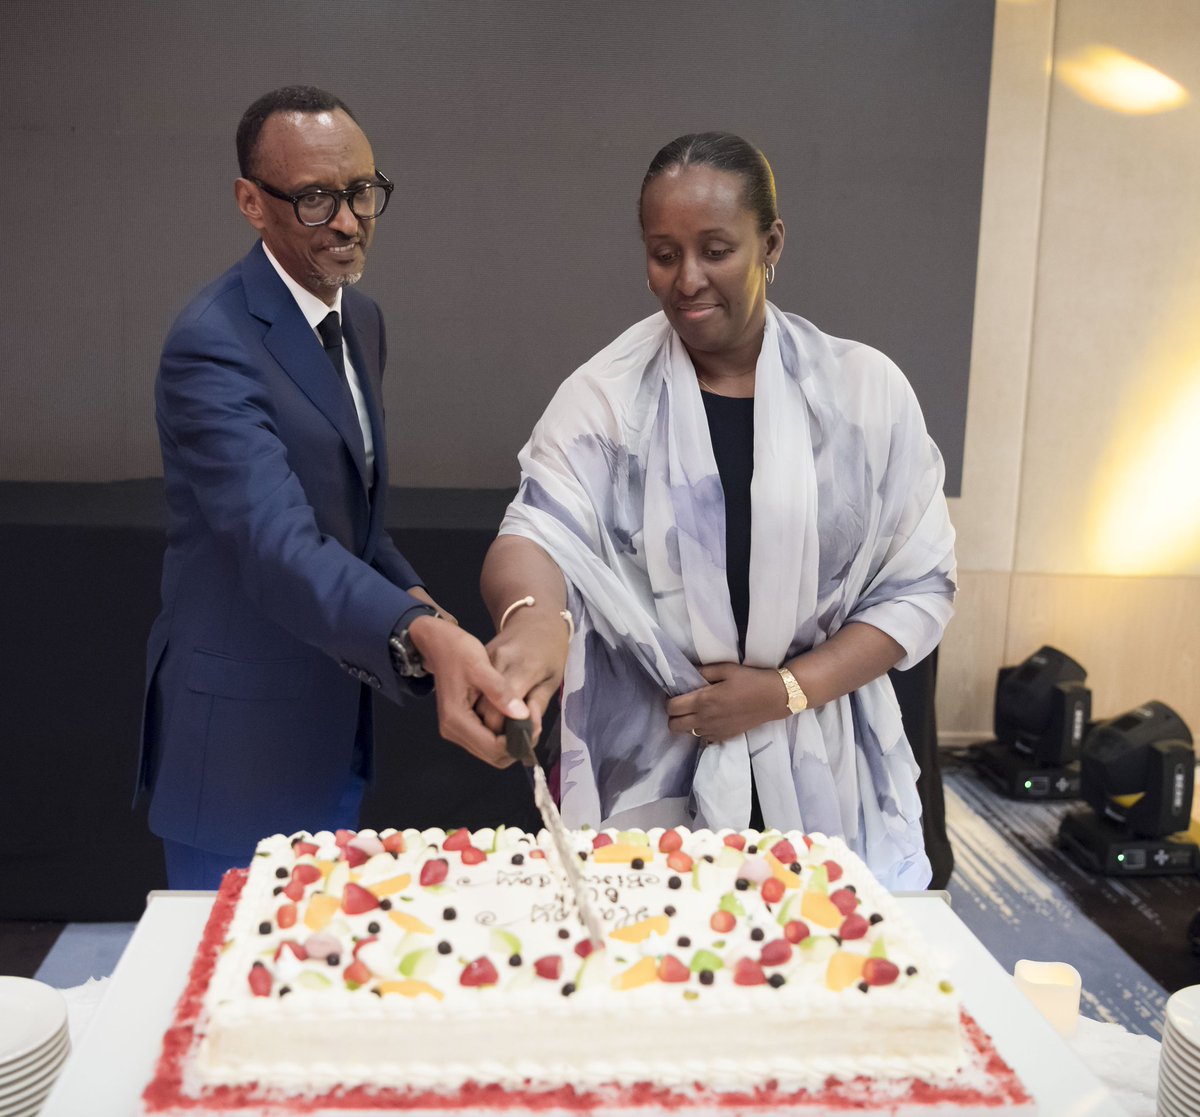 It is always a blessing to celebrate you @PaulKagame! Happiest birthday to a wonderful leader, father, grandfather and husband. 65 is a beautiful milestone indeed. I am ever thankful for the family we have been given. You are a gift to us all! 🎂 -JK